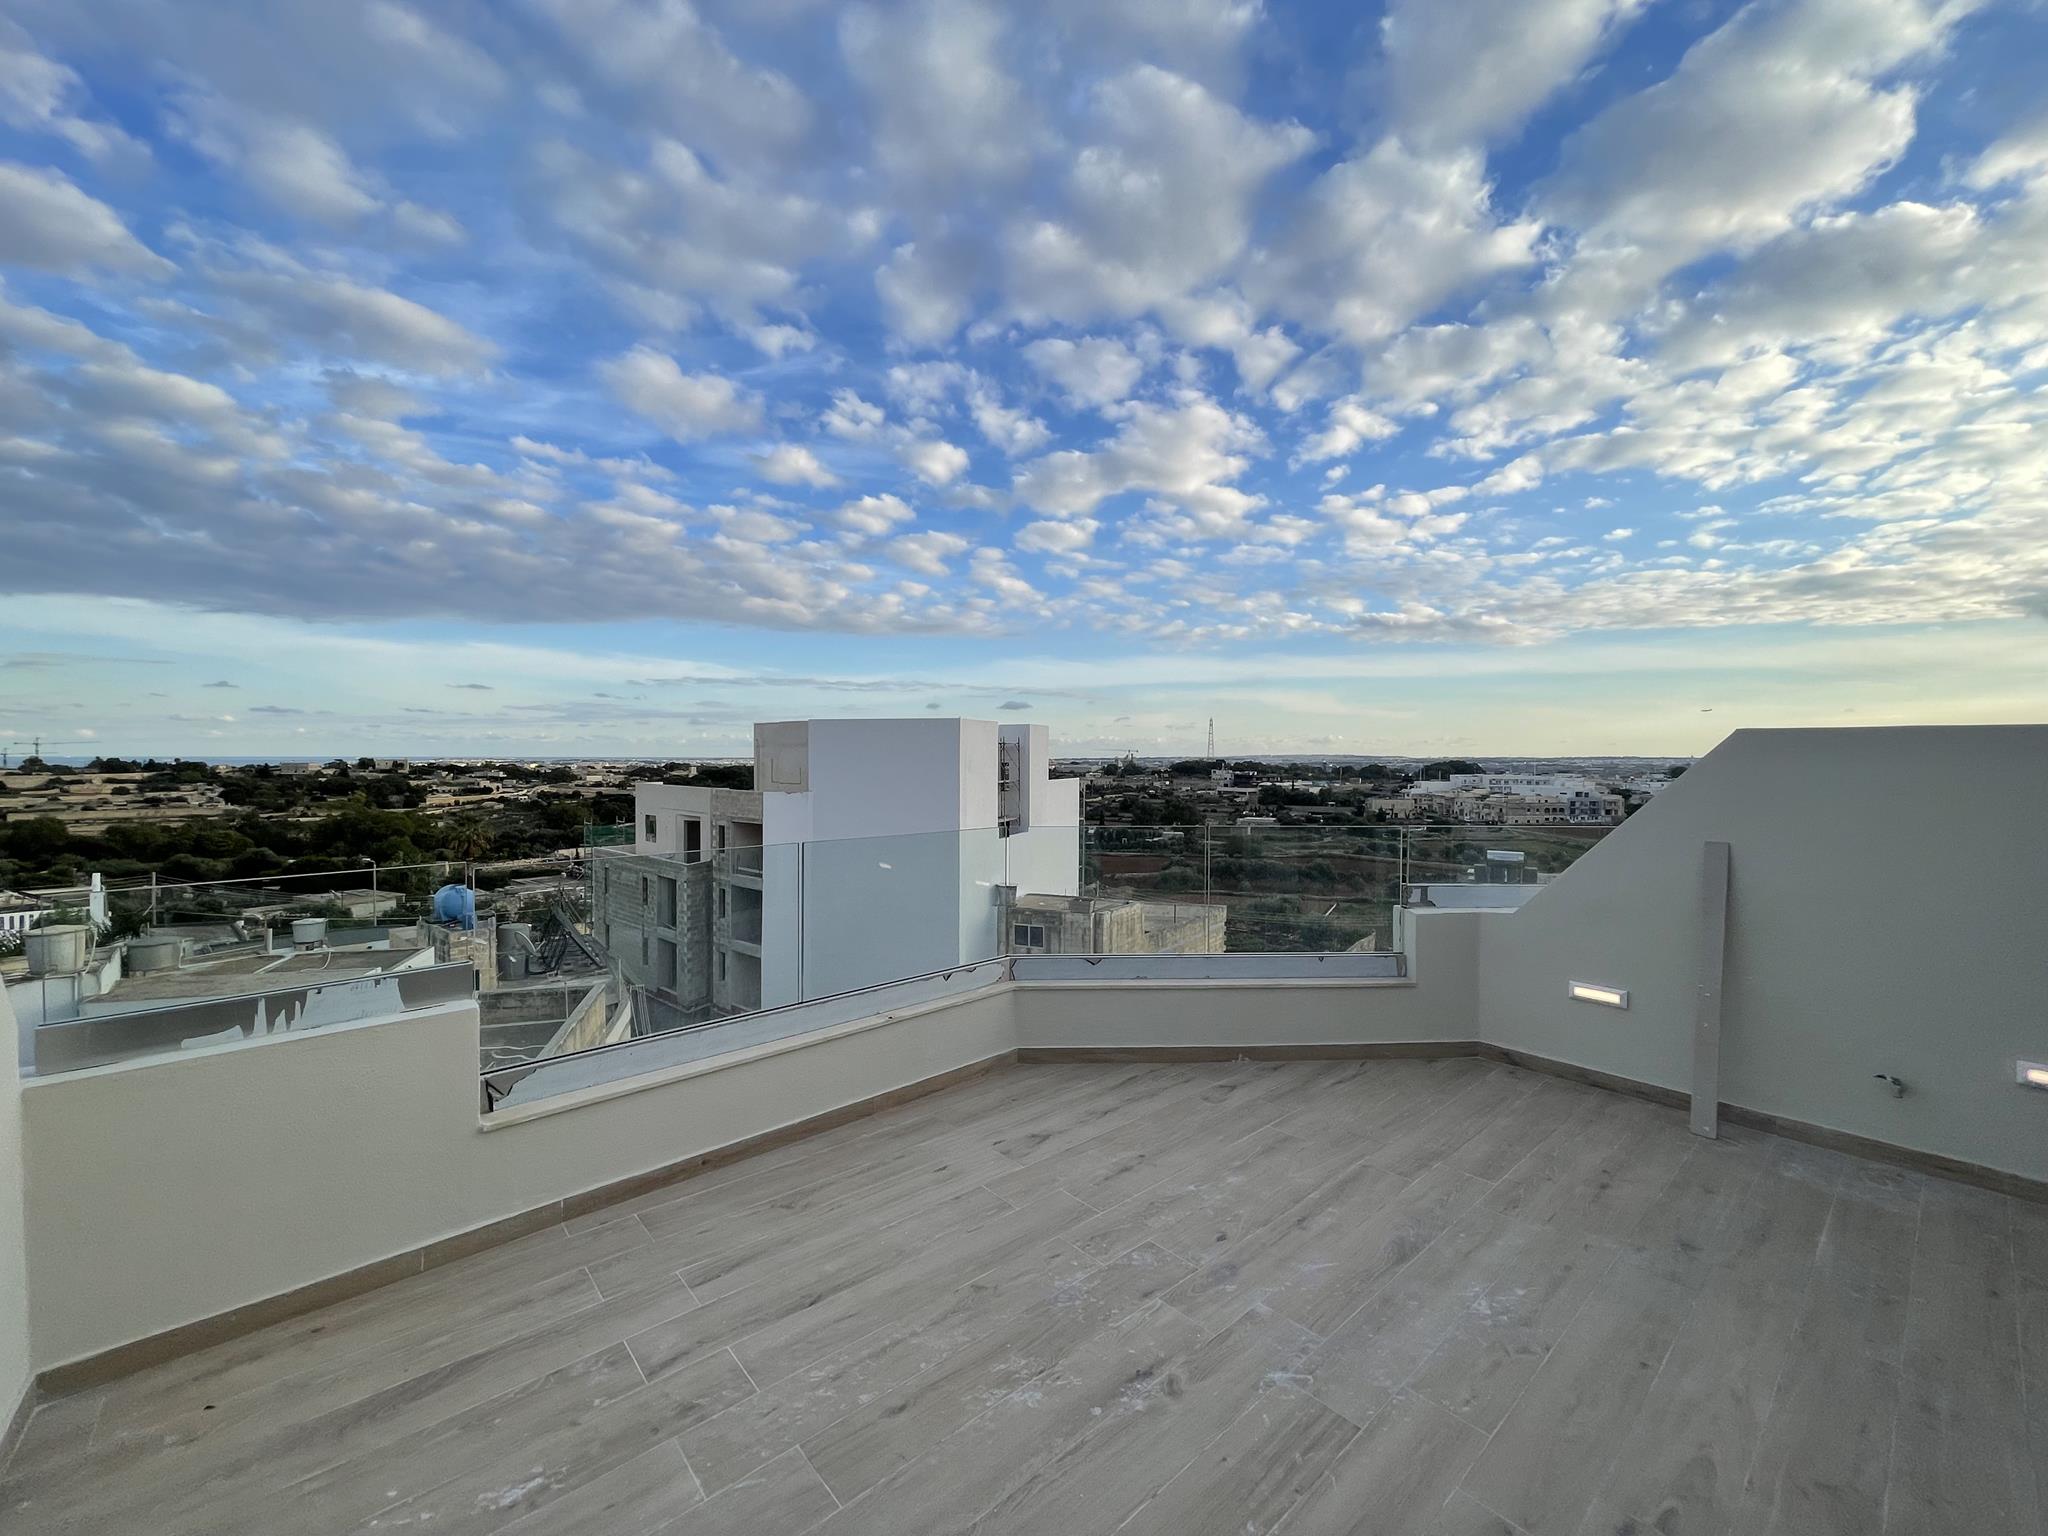 Gharghur Penthouse - Ref No 006259 - Image 1